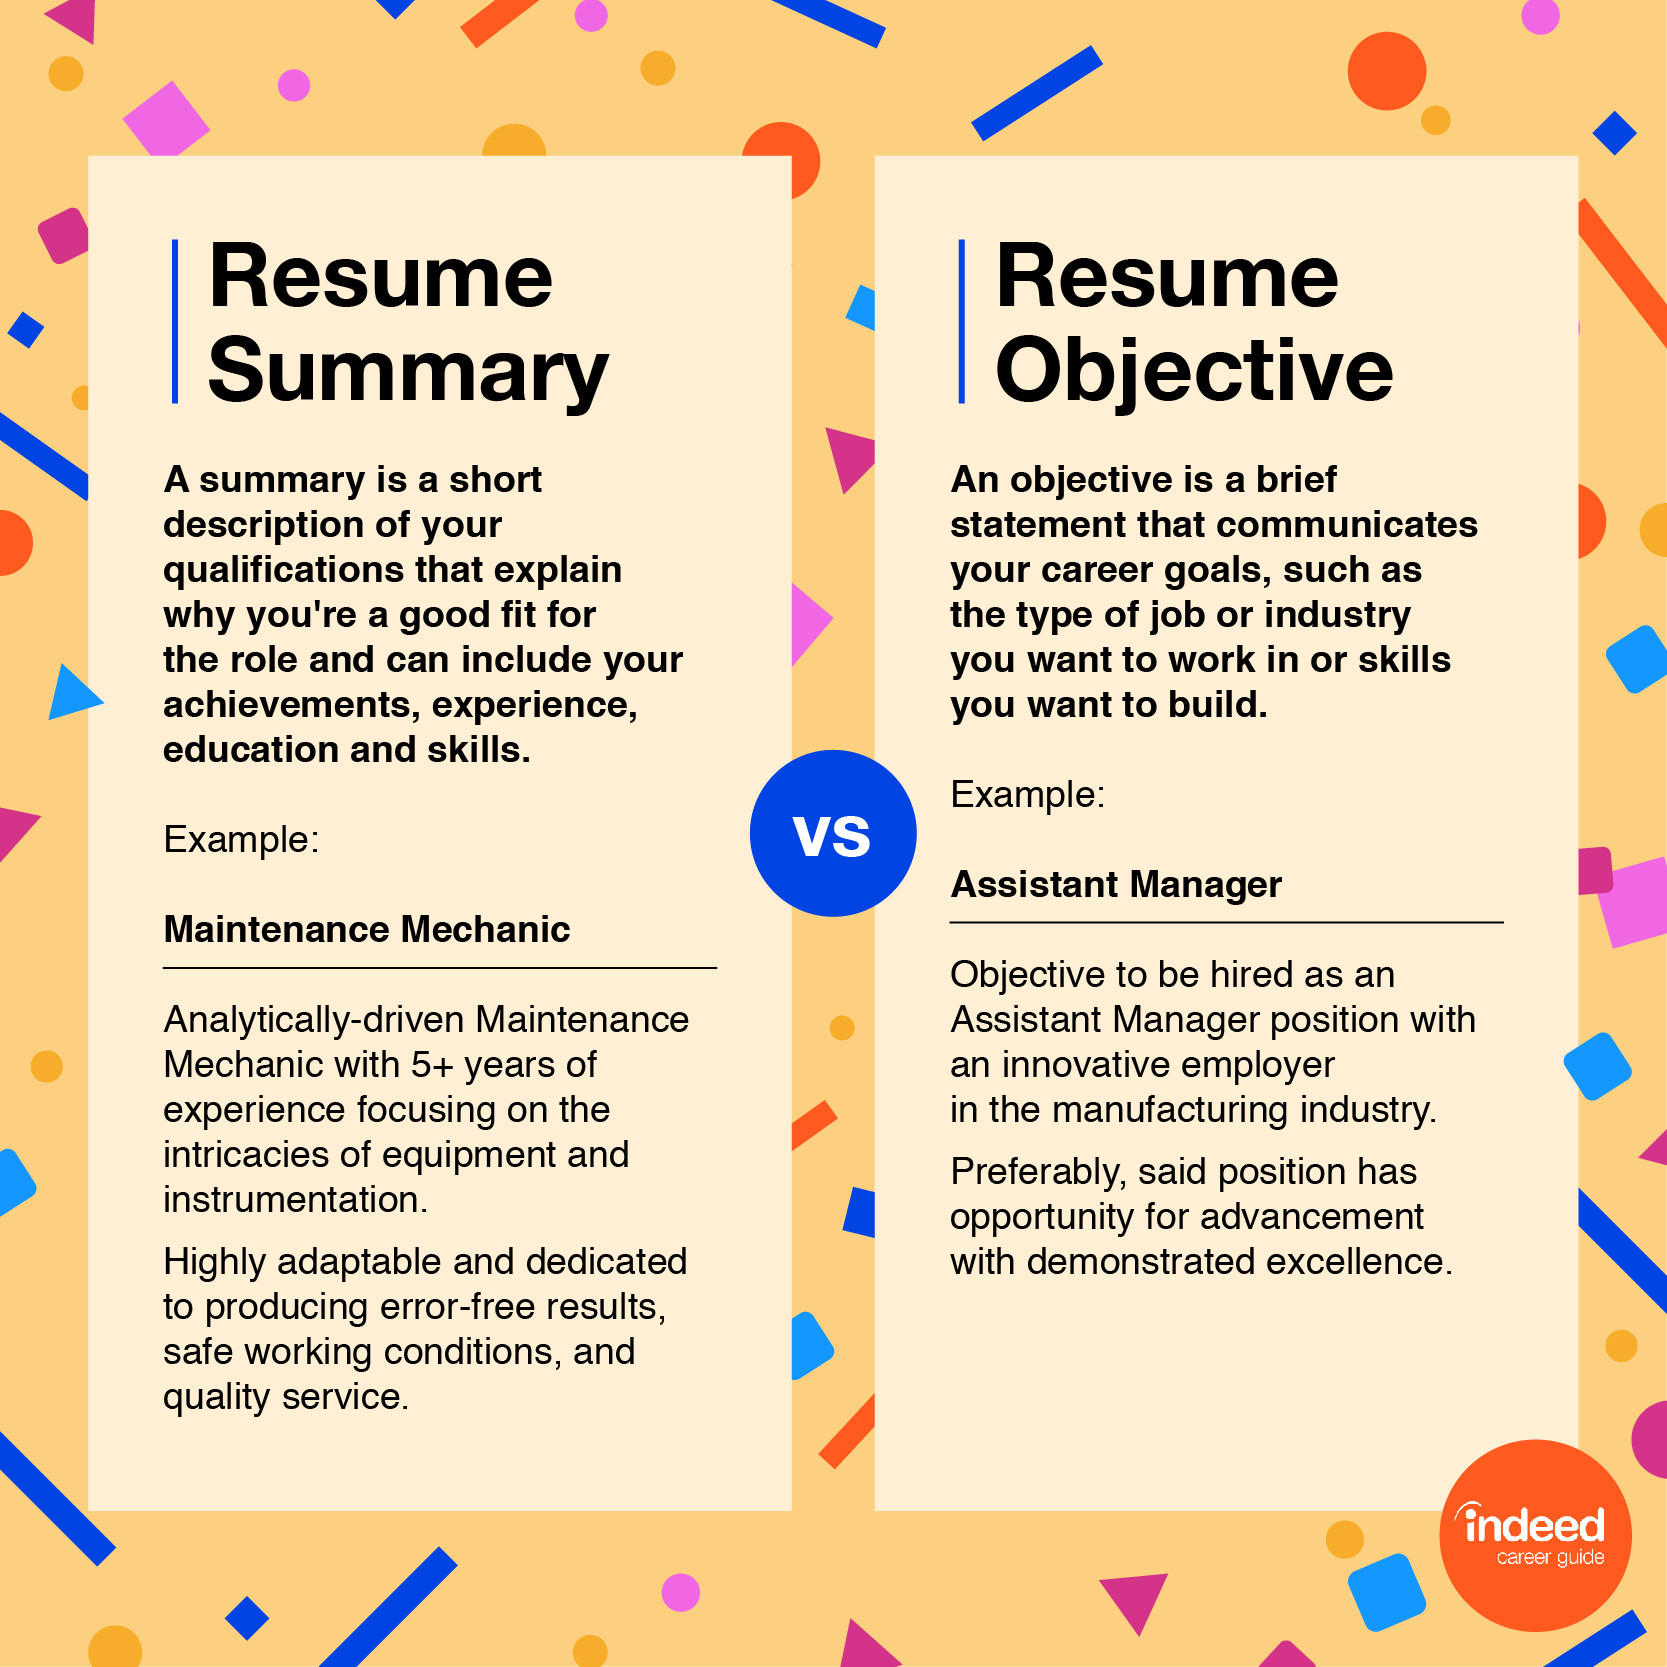 Sample Resume Objective Statements for Warehouse Warehouse Resume Objectives Vs. Professional Summaries Indeed.com